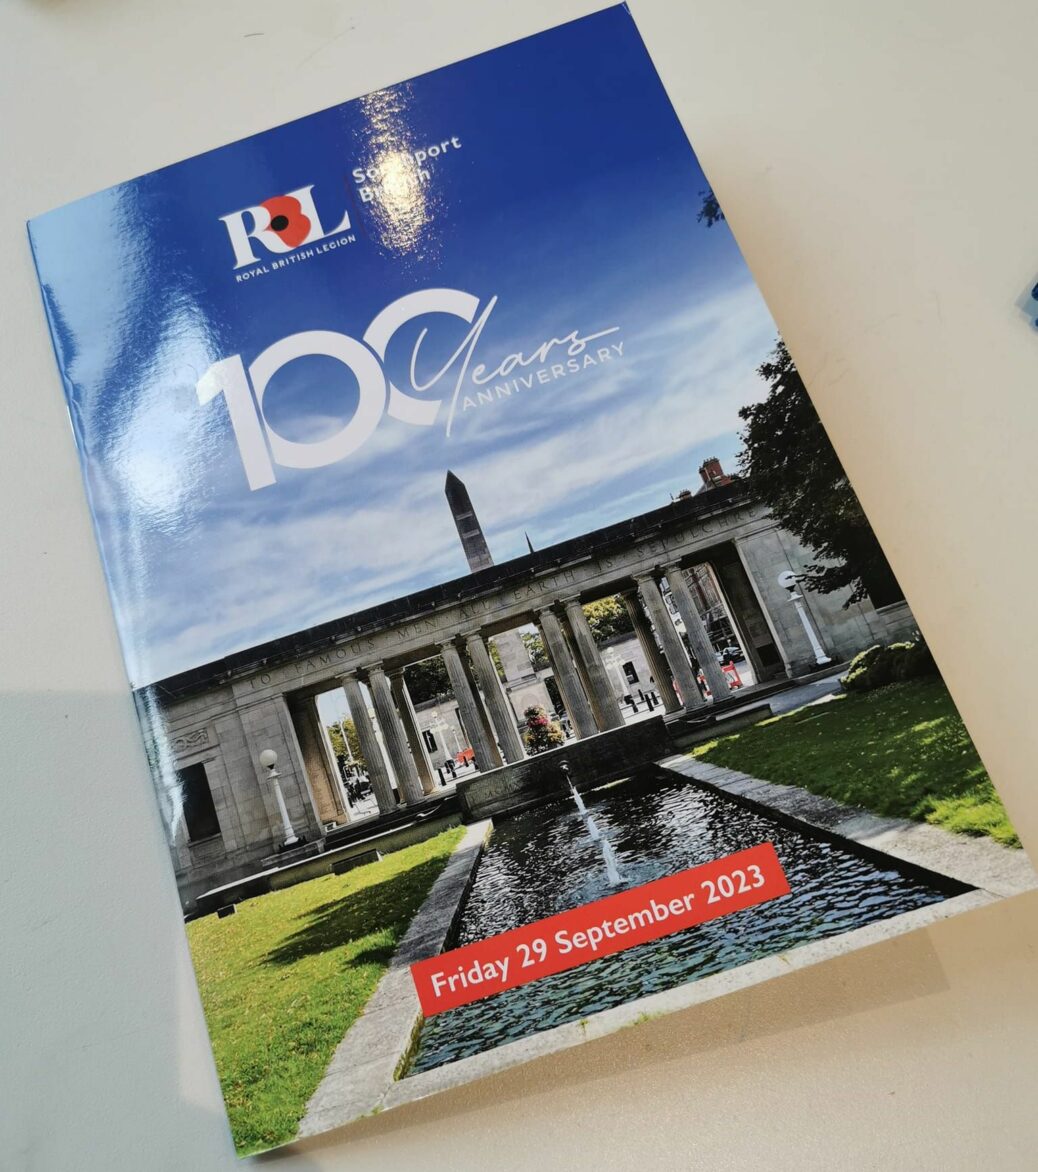 Souvenir programmes celebrating the rededication of Southport War Memorial by Princess Anne will be on sale